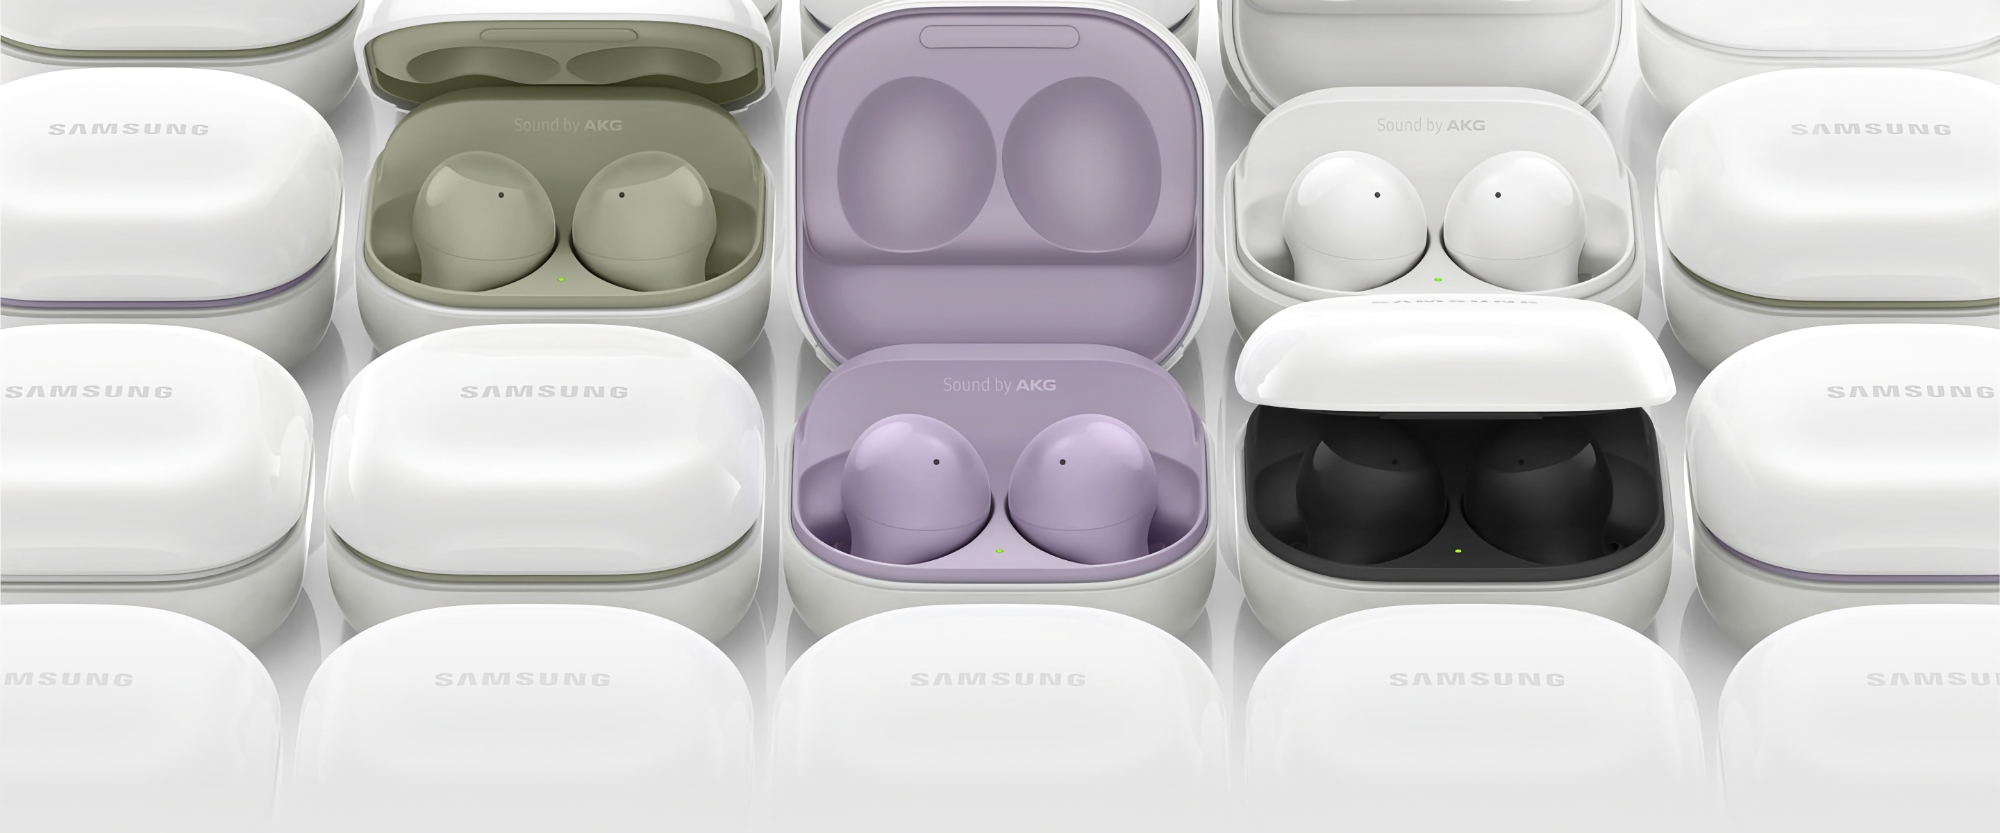 Offer of the day: Samsung Galaxy Buds2 with ANC and up to 29 hours of battery life at $60 off